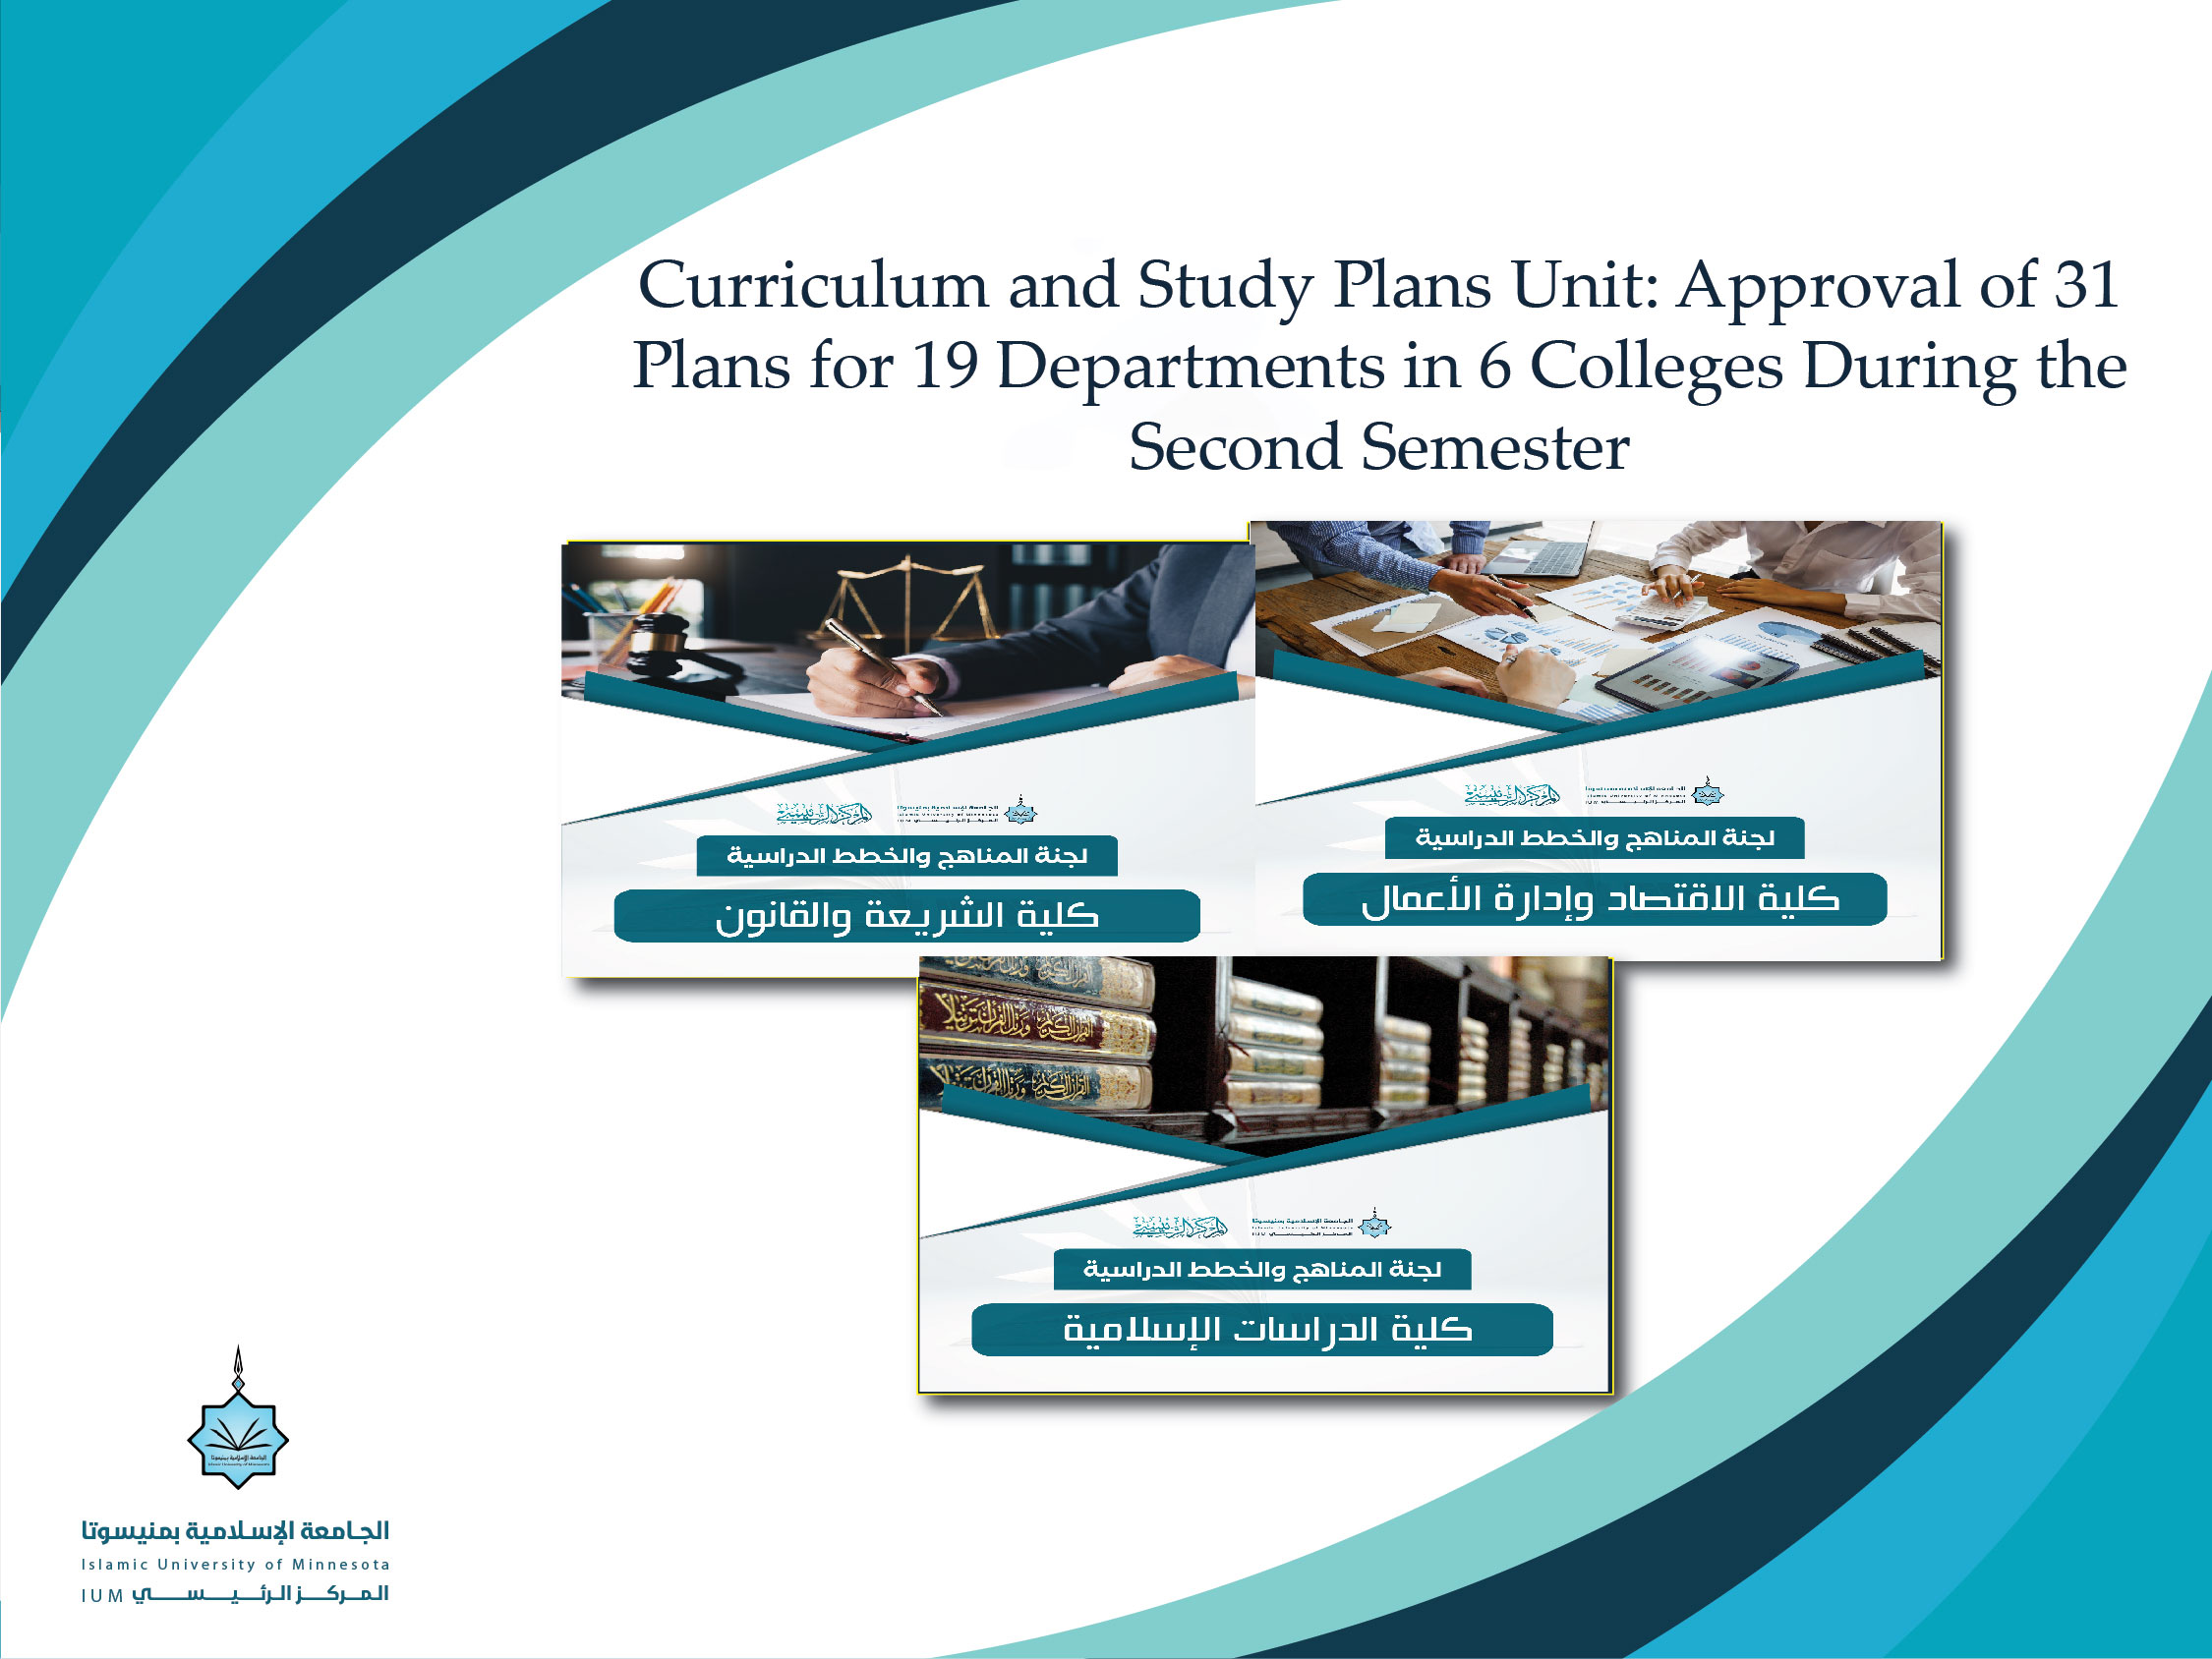 Curriculum and Study Plans Unit: Approval of 31 Plans for 19 Departments in 6 Colleges During the Second Semester